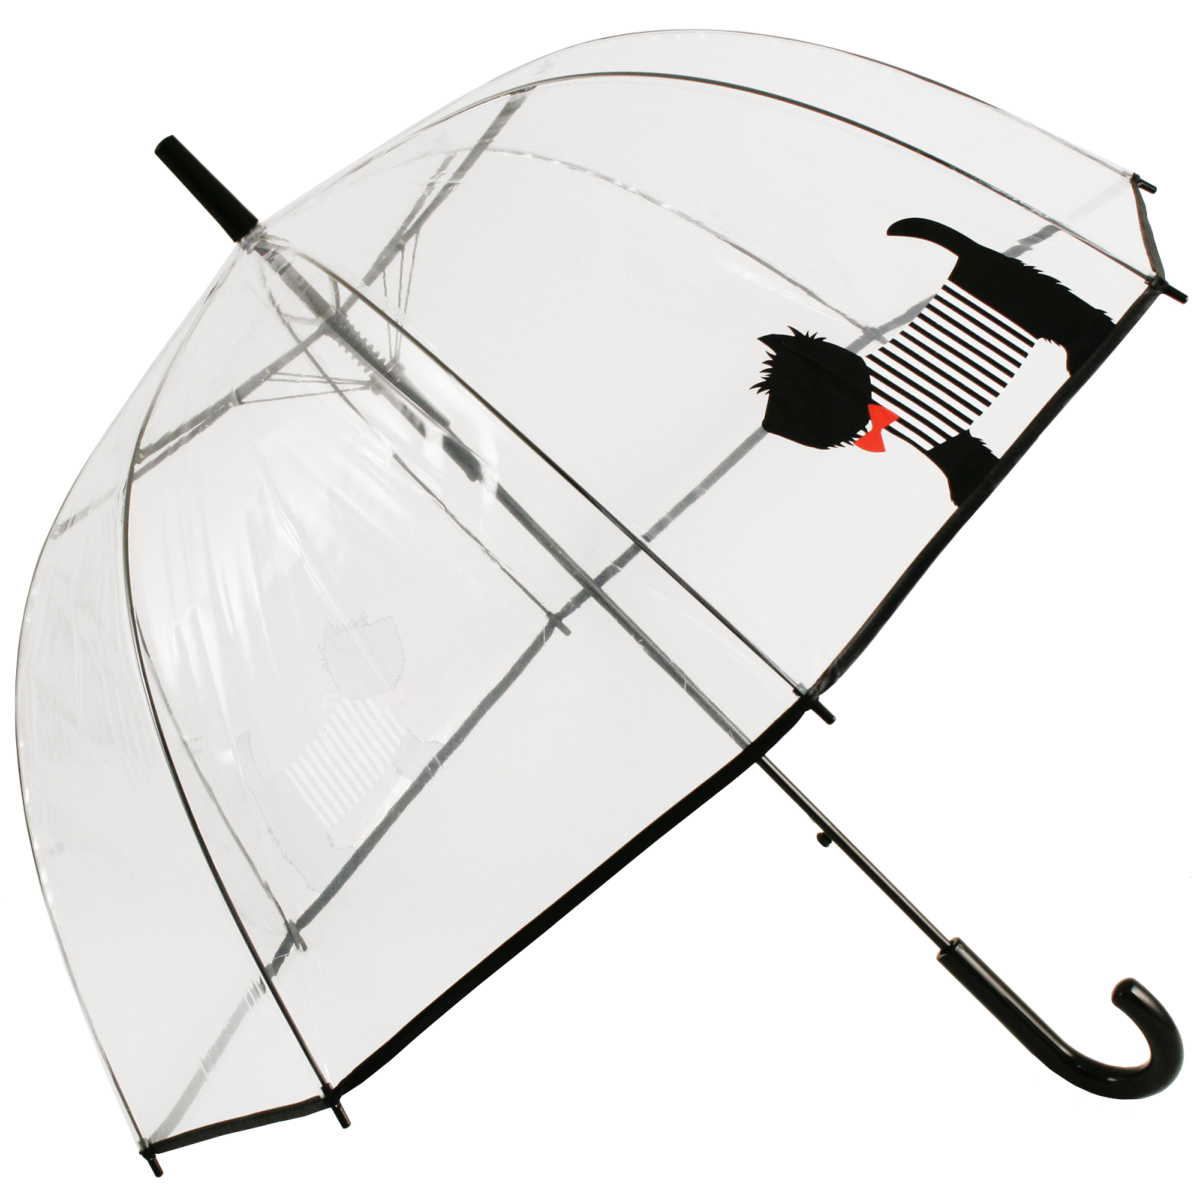 Clear See-through Dome Umbrella - Scotty Dog